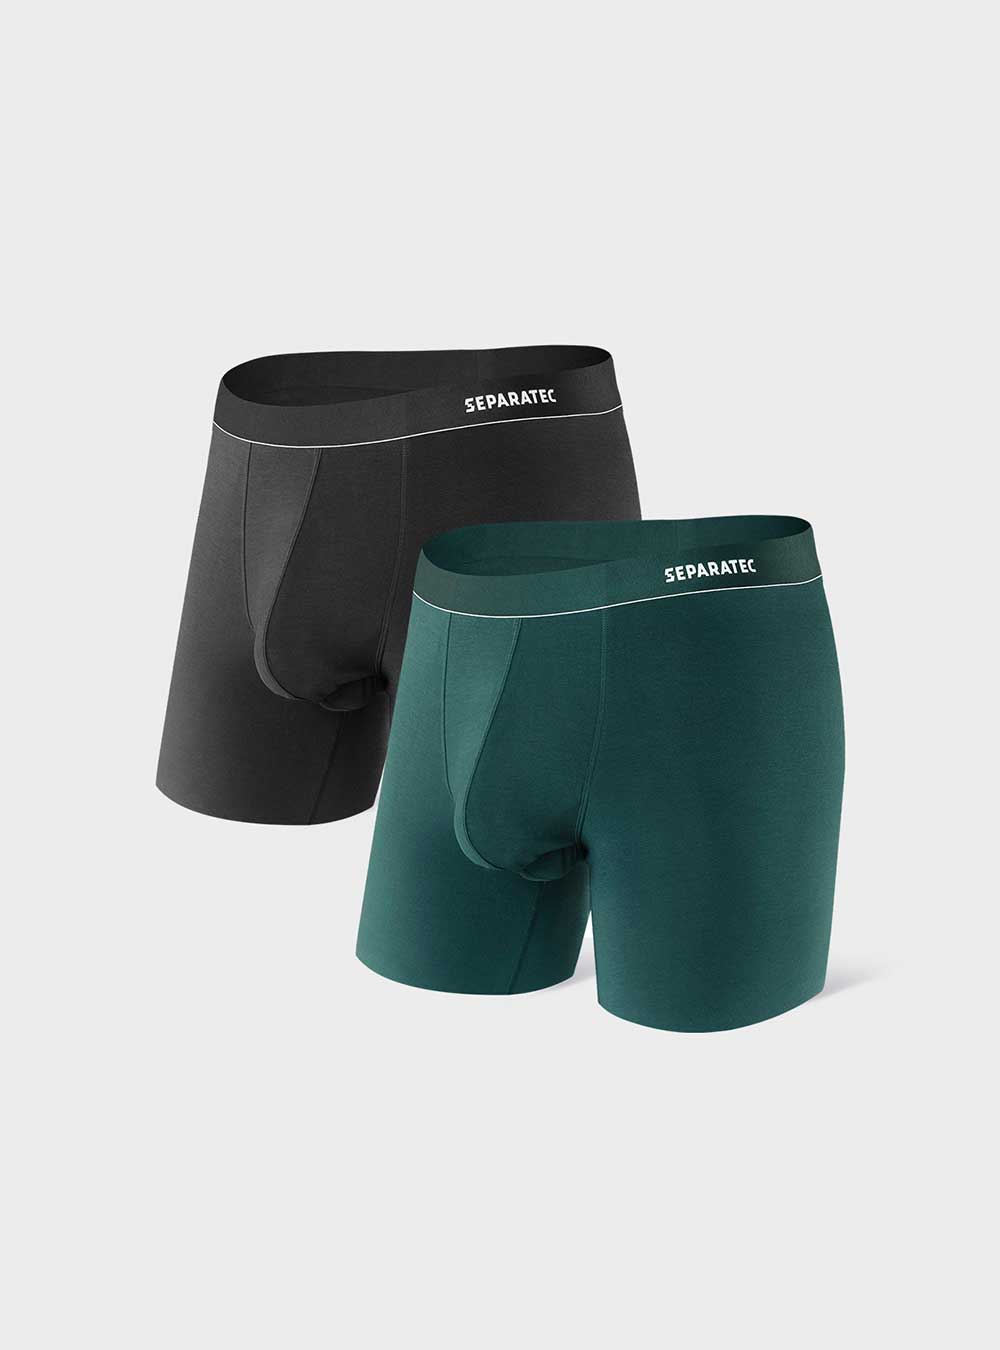 SuperSoft Micromodal Stretch Boxer Briefs 2 Pack